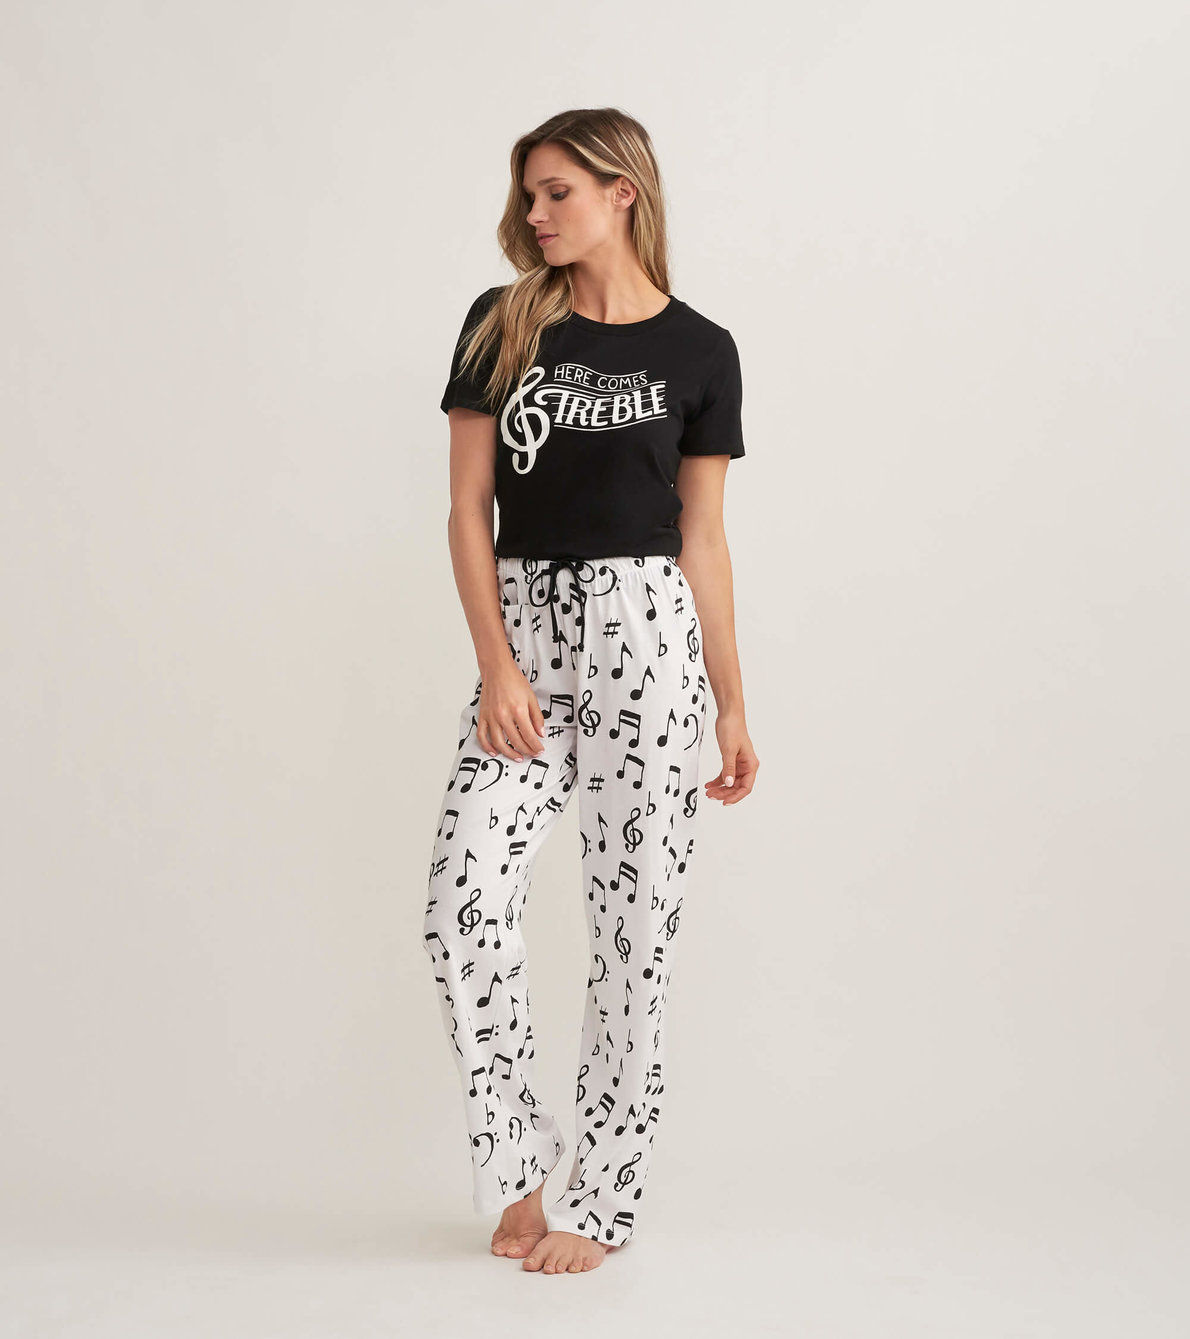 View larger image of Treble Maker Women's Tee and Pants Pajama Separates